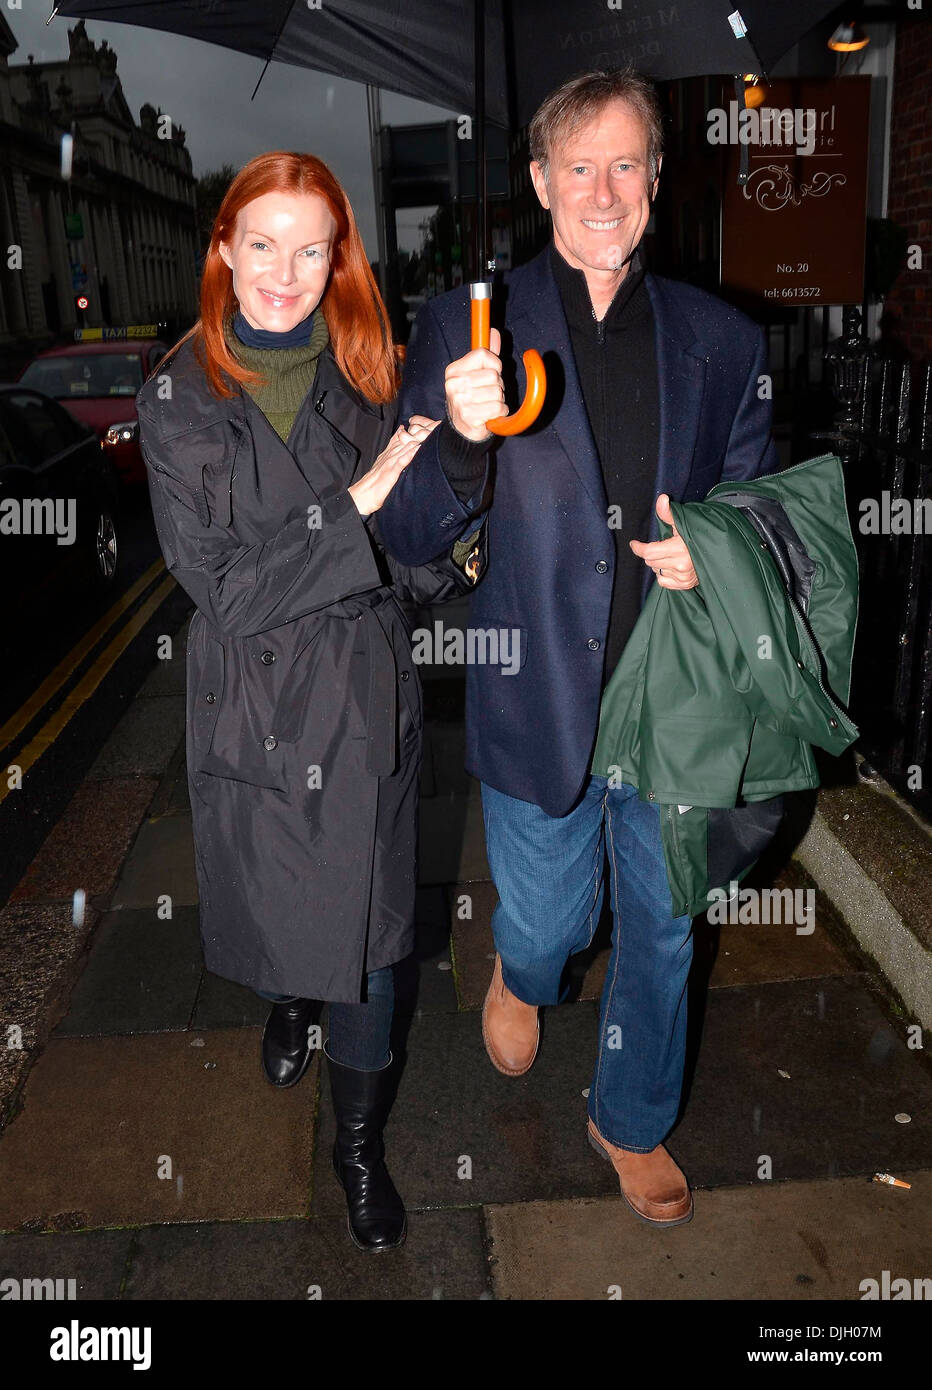 Desperate Housewives' star Marcia Cross and husband Tom Mahoney seen in rain as they head to have dinner Dublin Ireland - Stock Photo